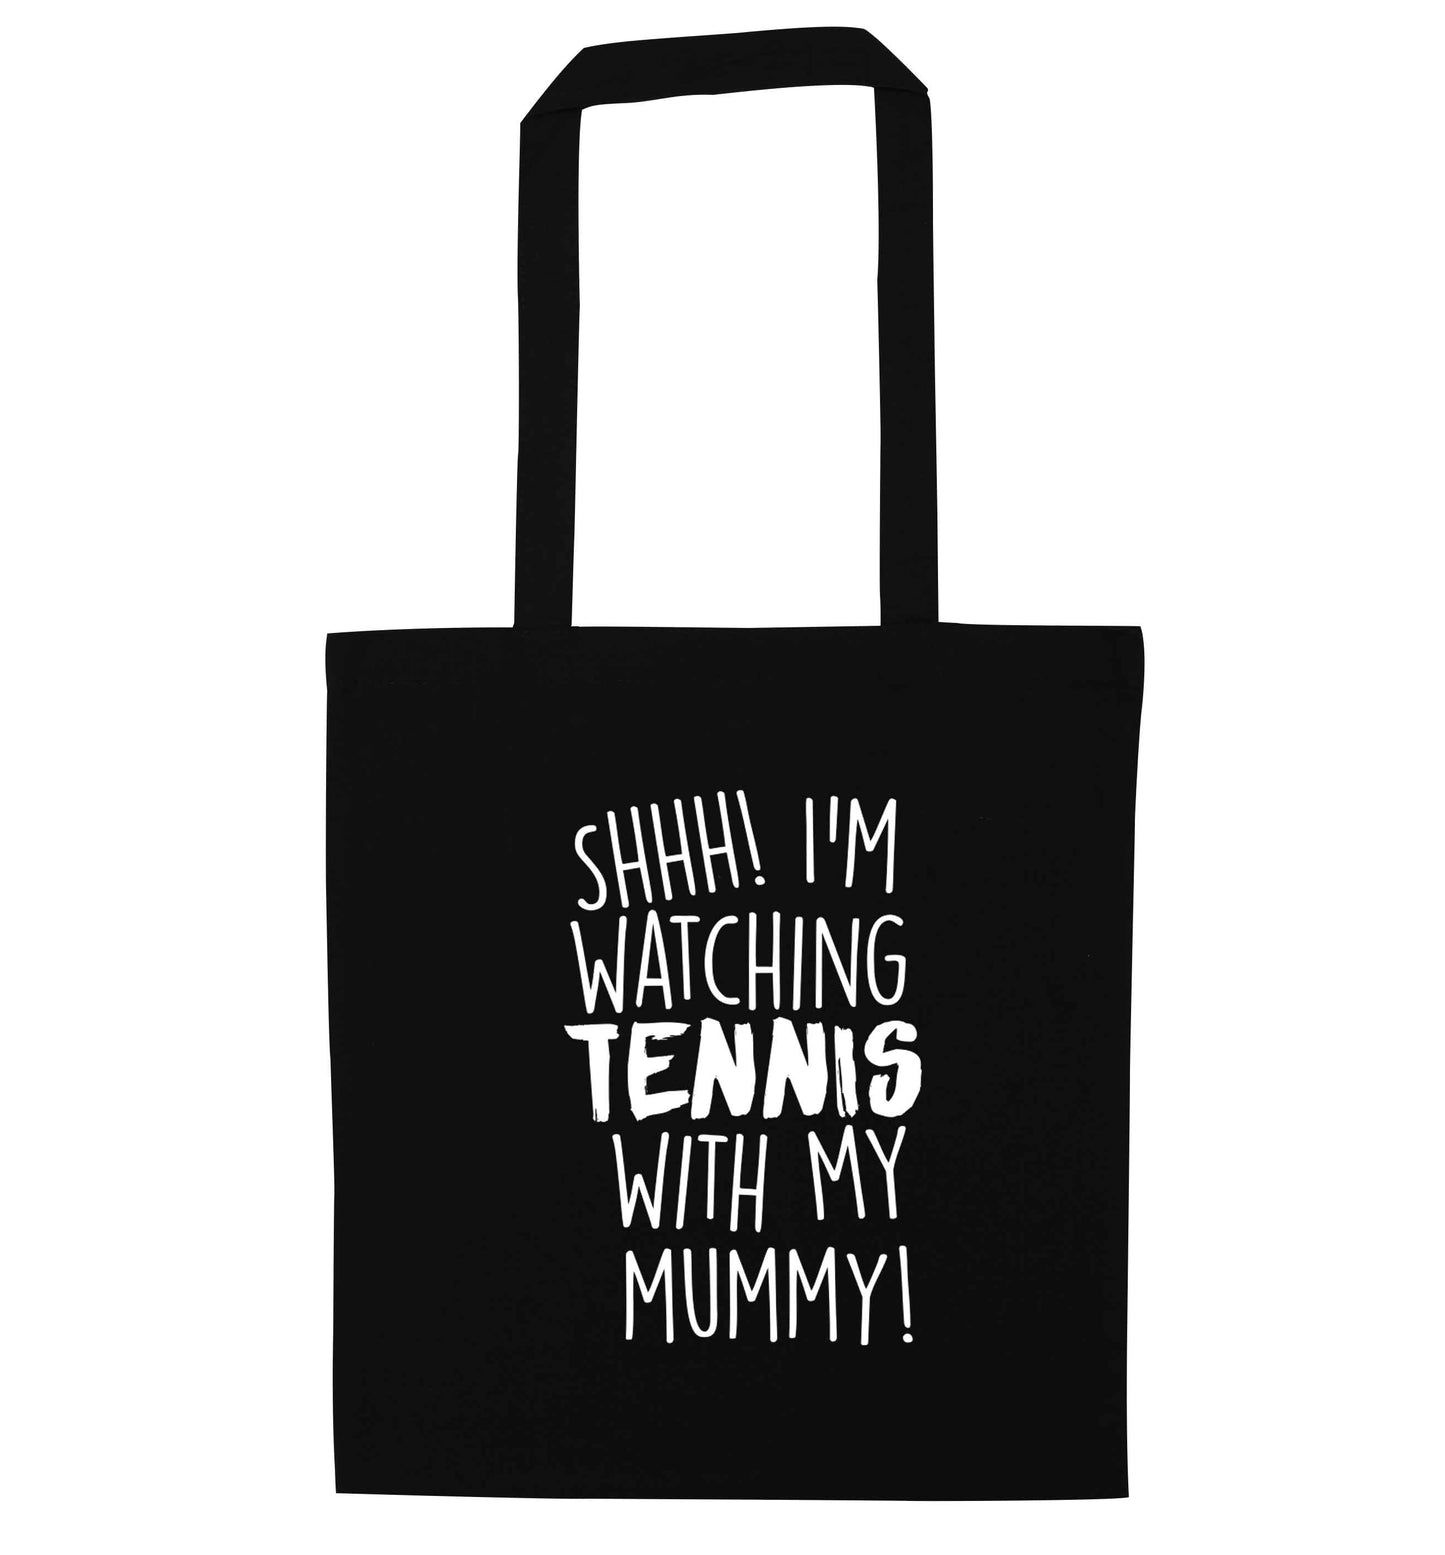 Shh! I'm watching tennis with my mummy! black tote bag